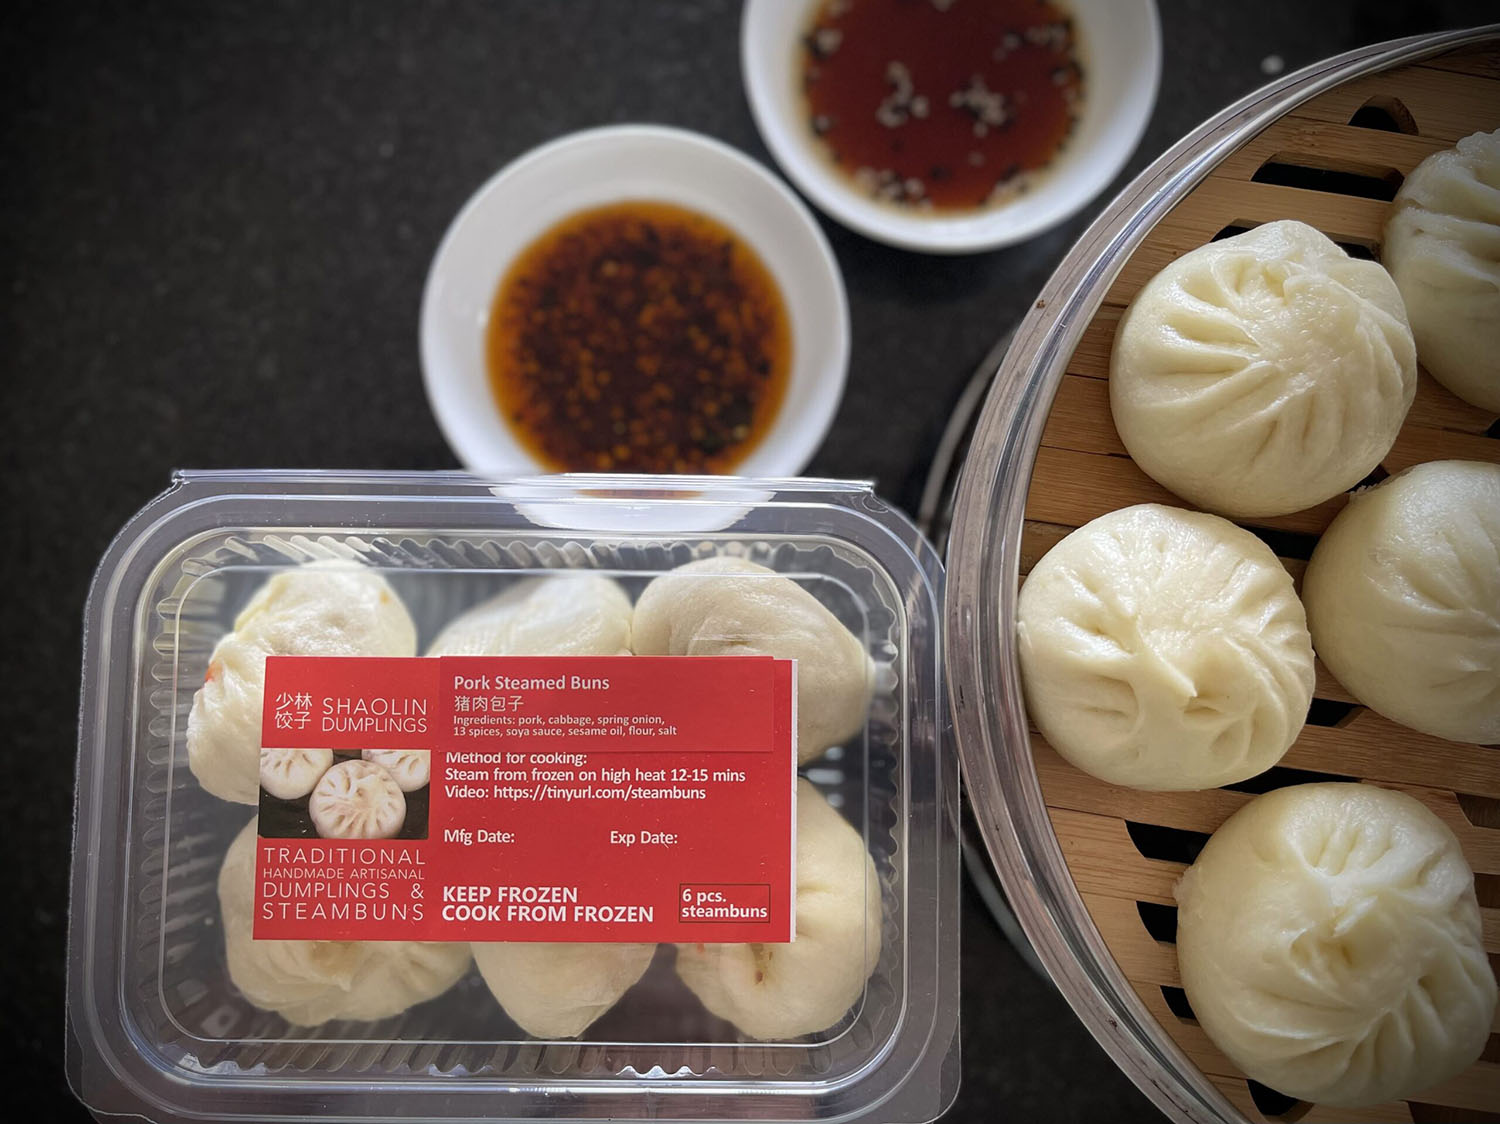 The Red Moon Pork Bao Buns at Costco are Doughy and Sweet